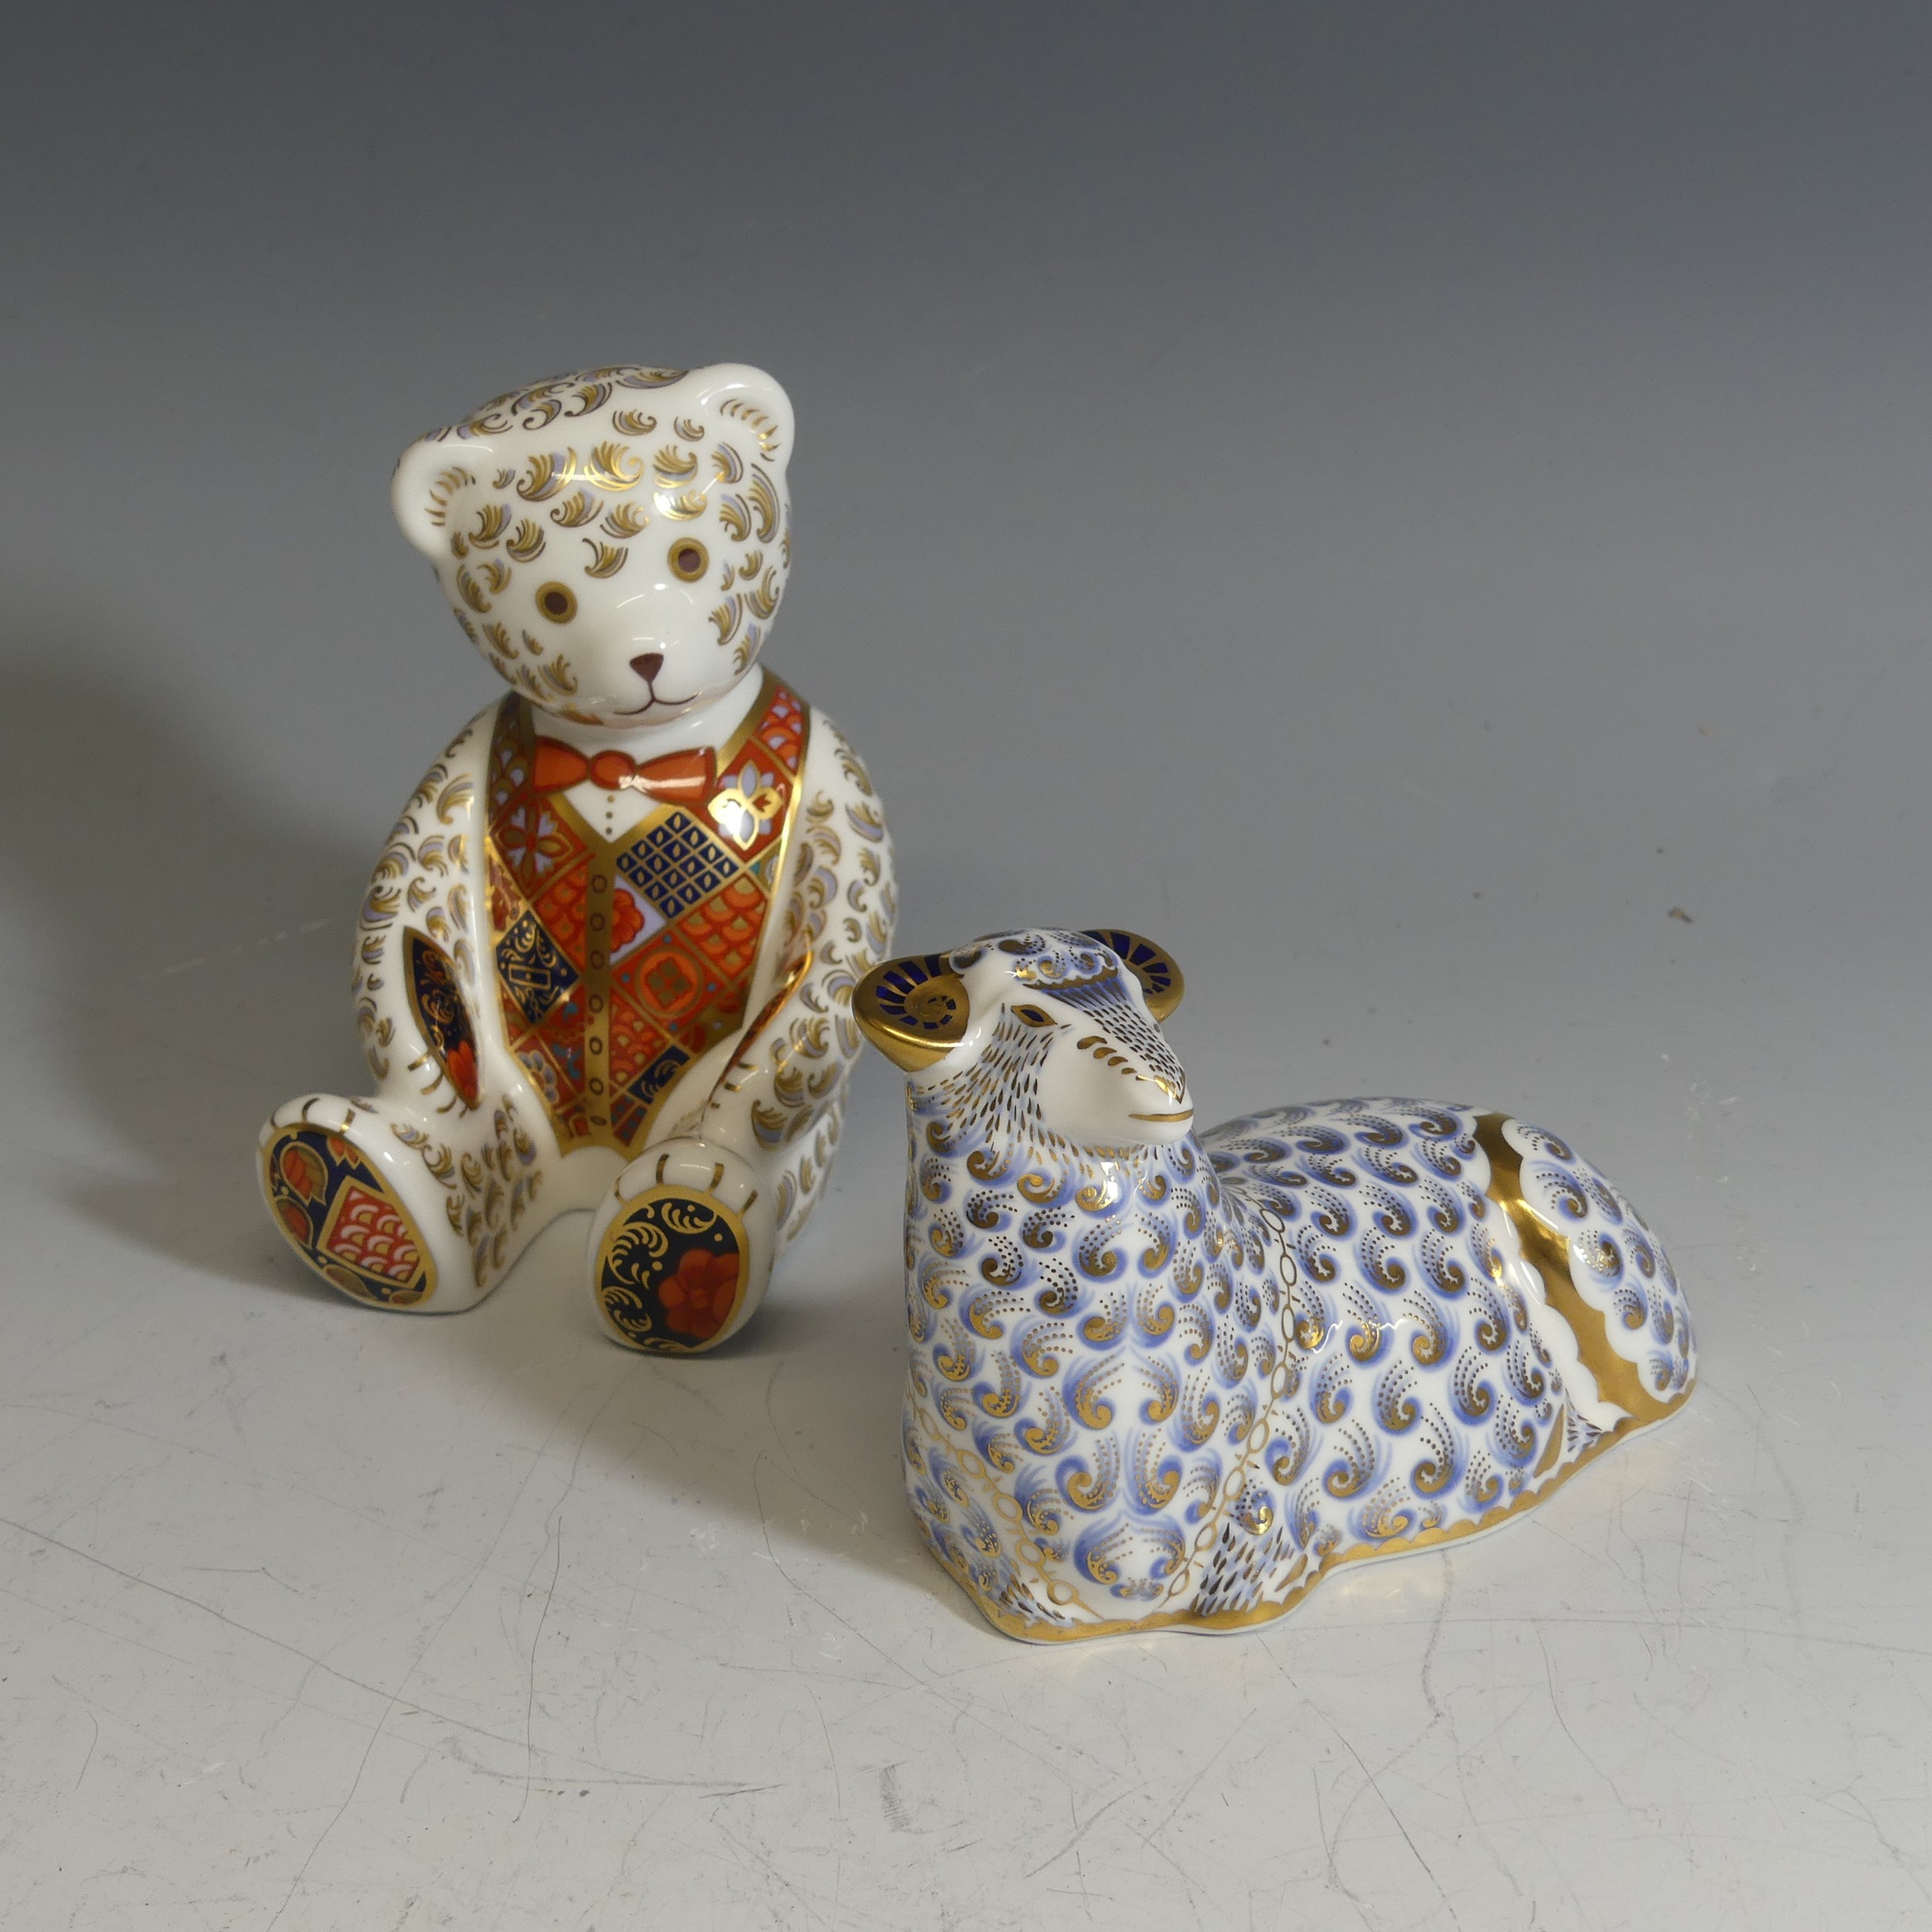 A limited edition Royal Crown Derby teddy Paperweight, designed for Goviers of Sidmouth, edition